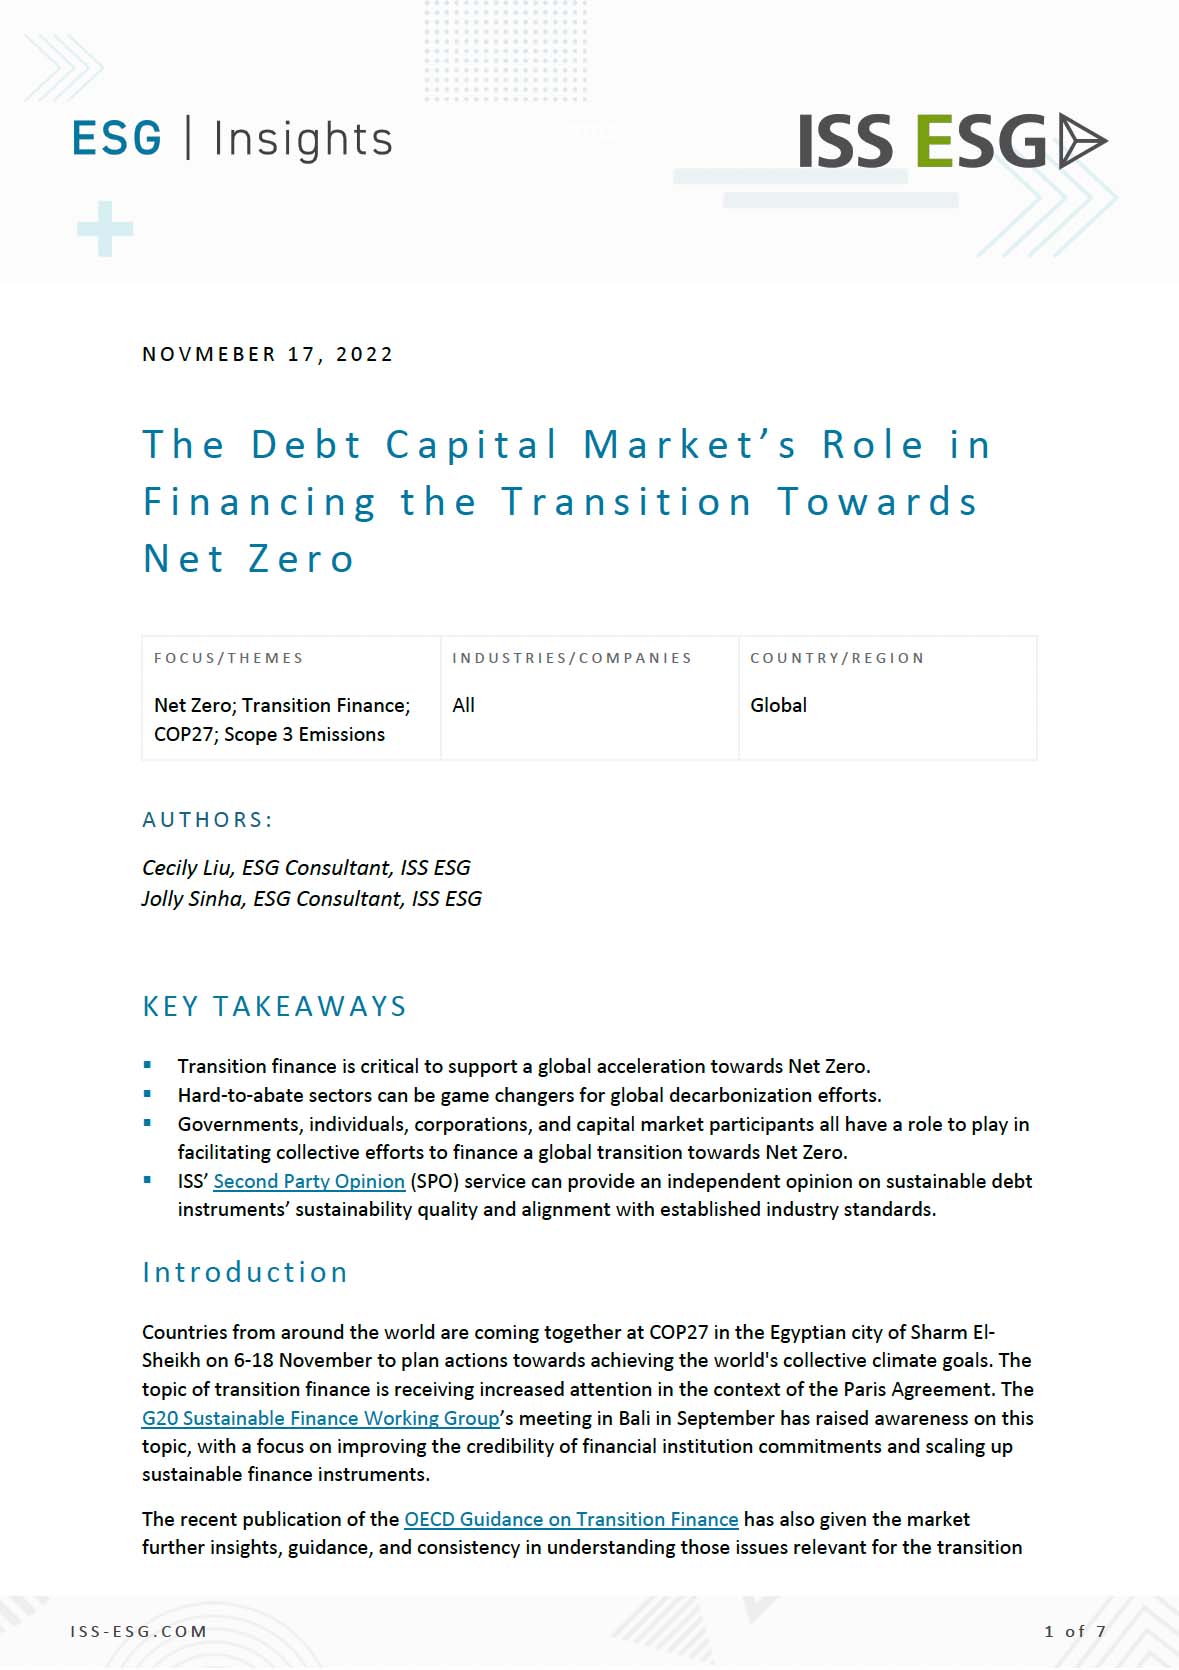 the-debt-capital-markets-role-in-financing-the-transition-towards-net-zero-cover